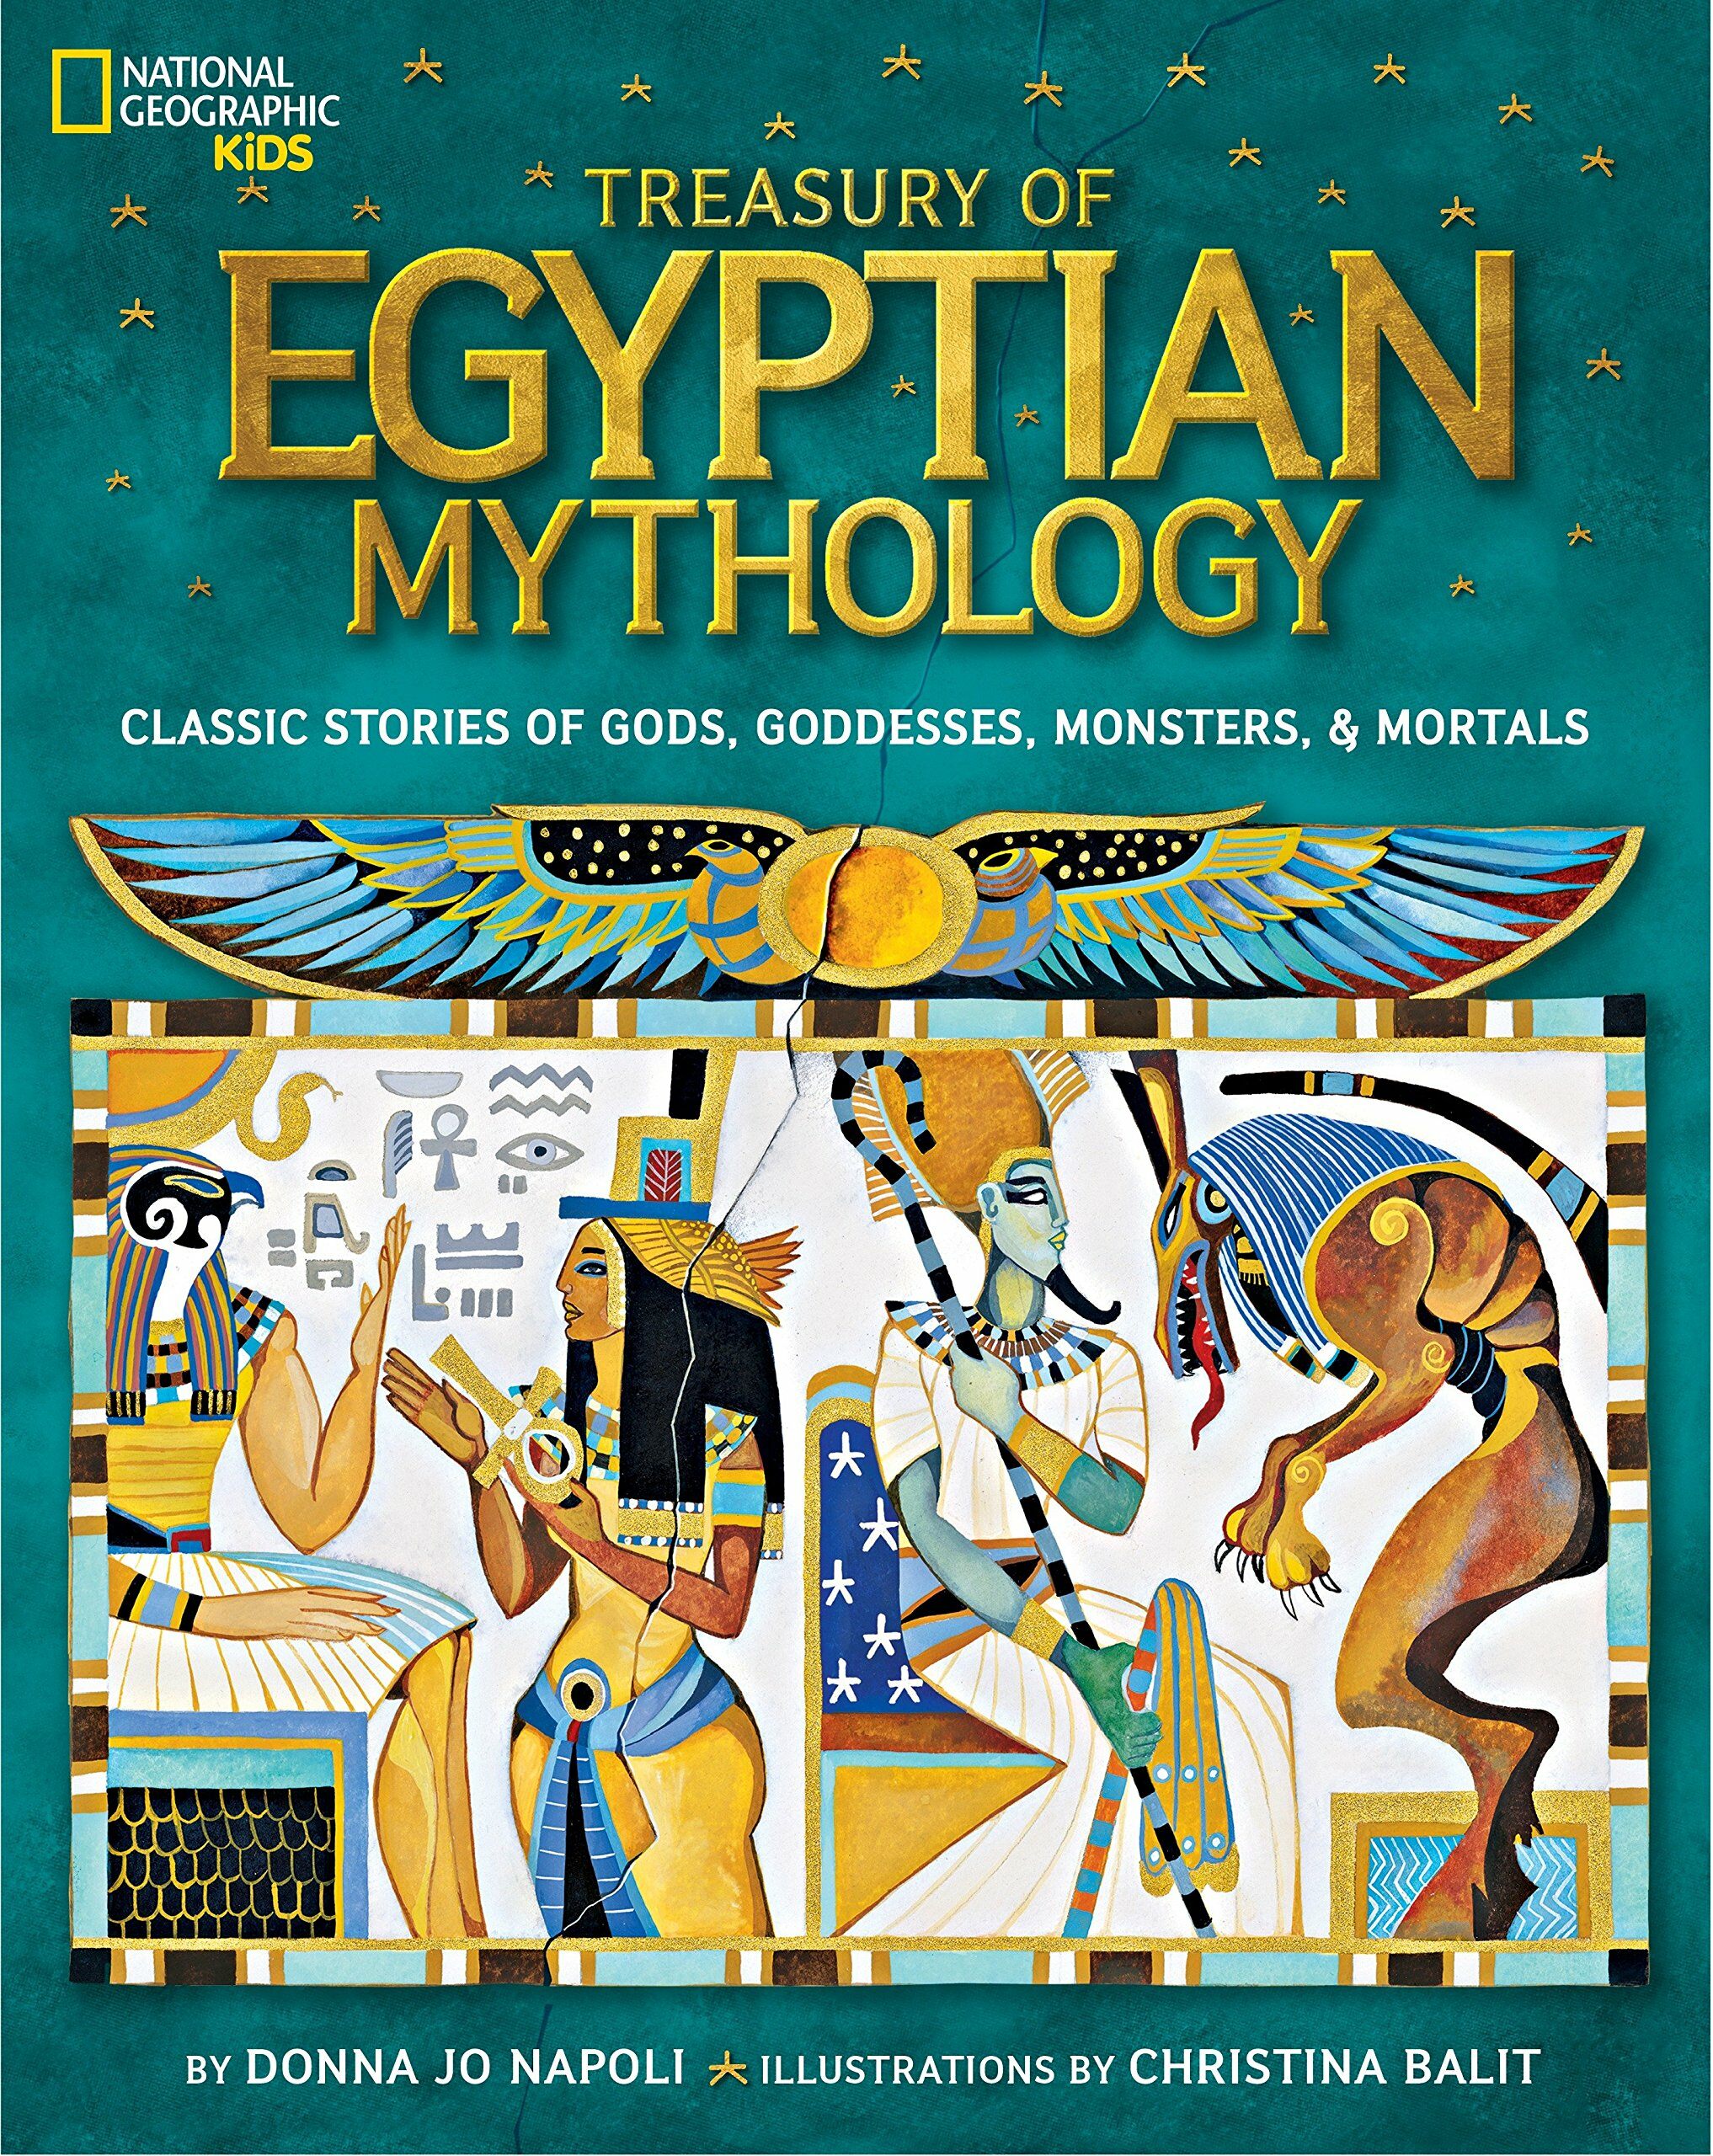 Treasury of Egyptian Mythology: Classic Stories of Gods, Goddesses, Monsters & Mortals (Hardcover)